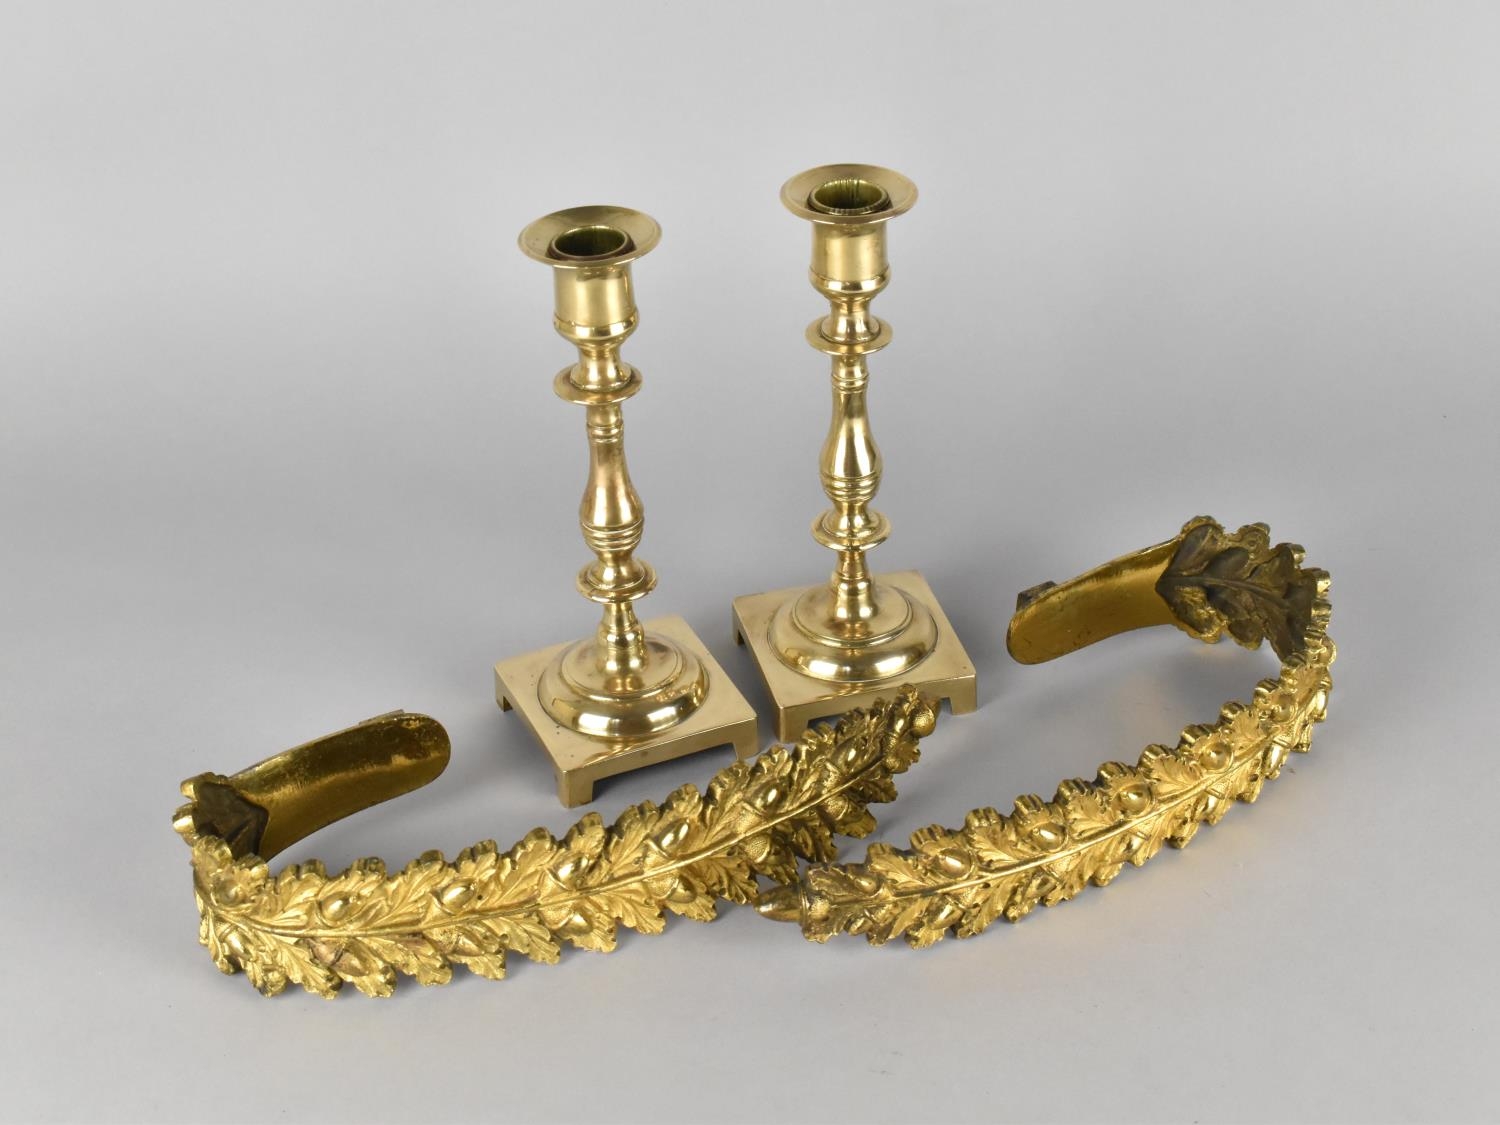 A Pair of Ornate Brass Curtain Ties with Oakleaf and Acorn Decoration Together with a Pair of 20th